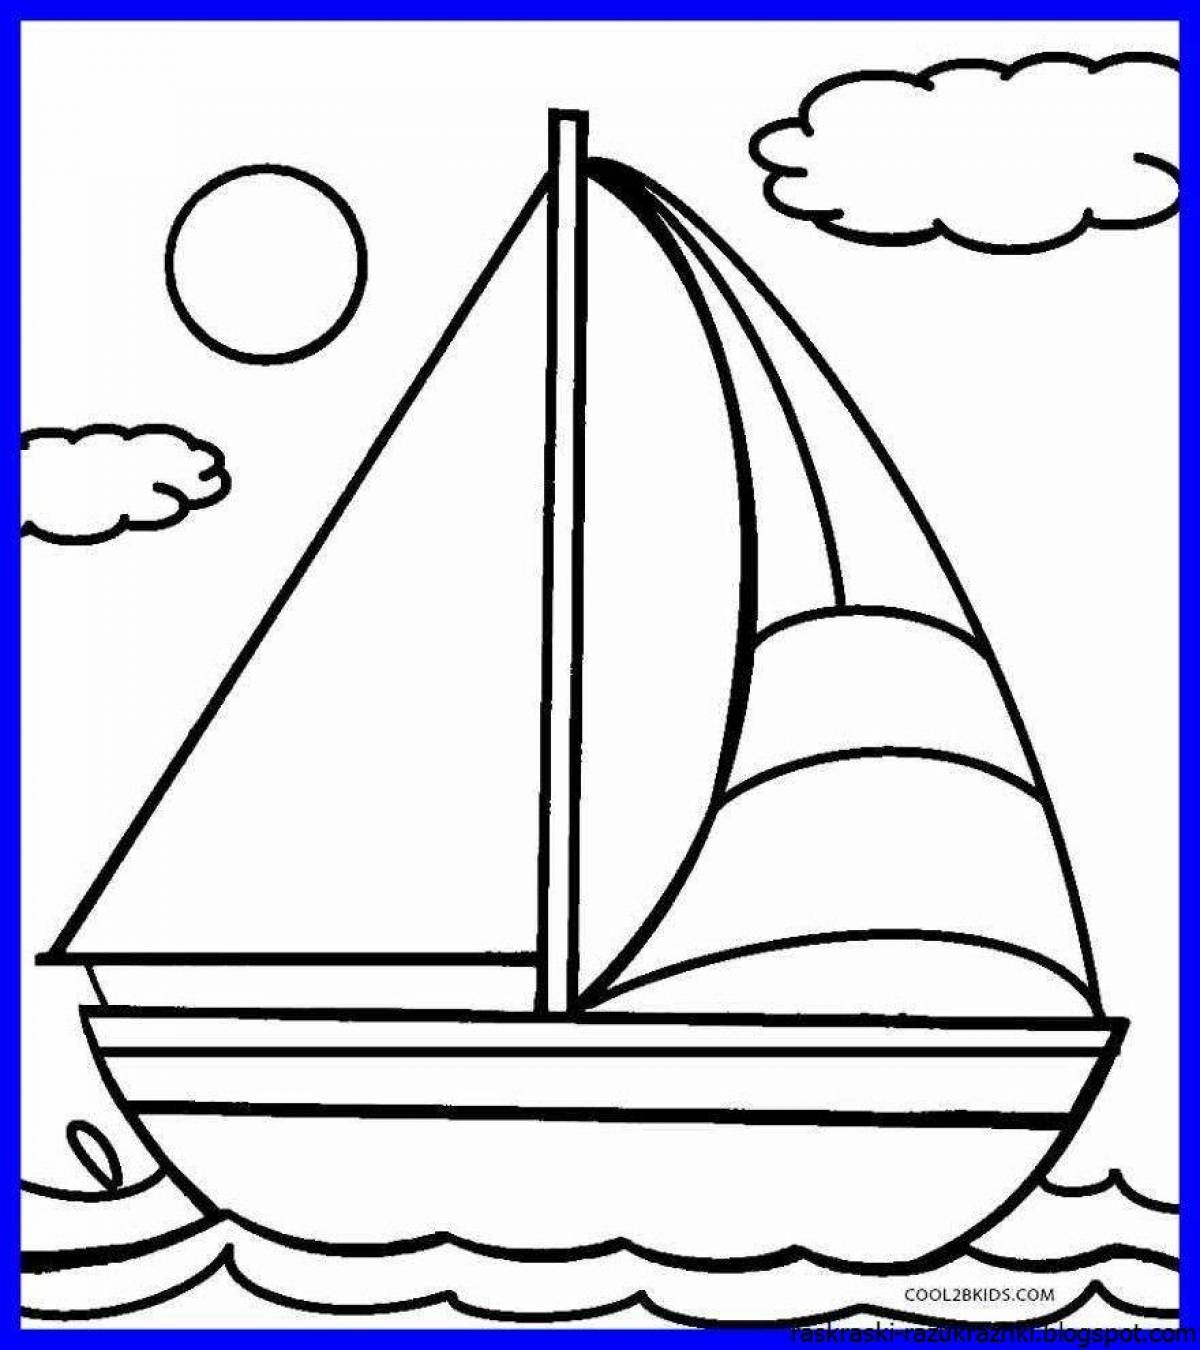 Cute transport coloring page for 4-5 year olds